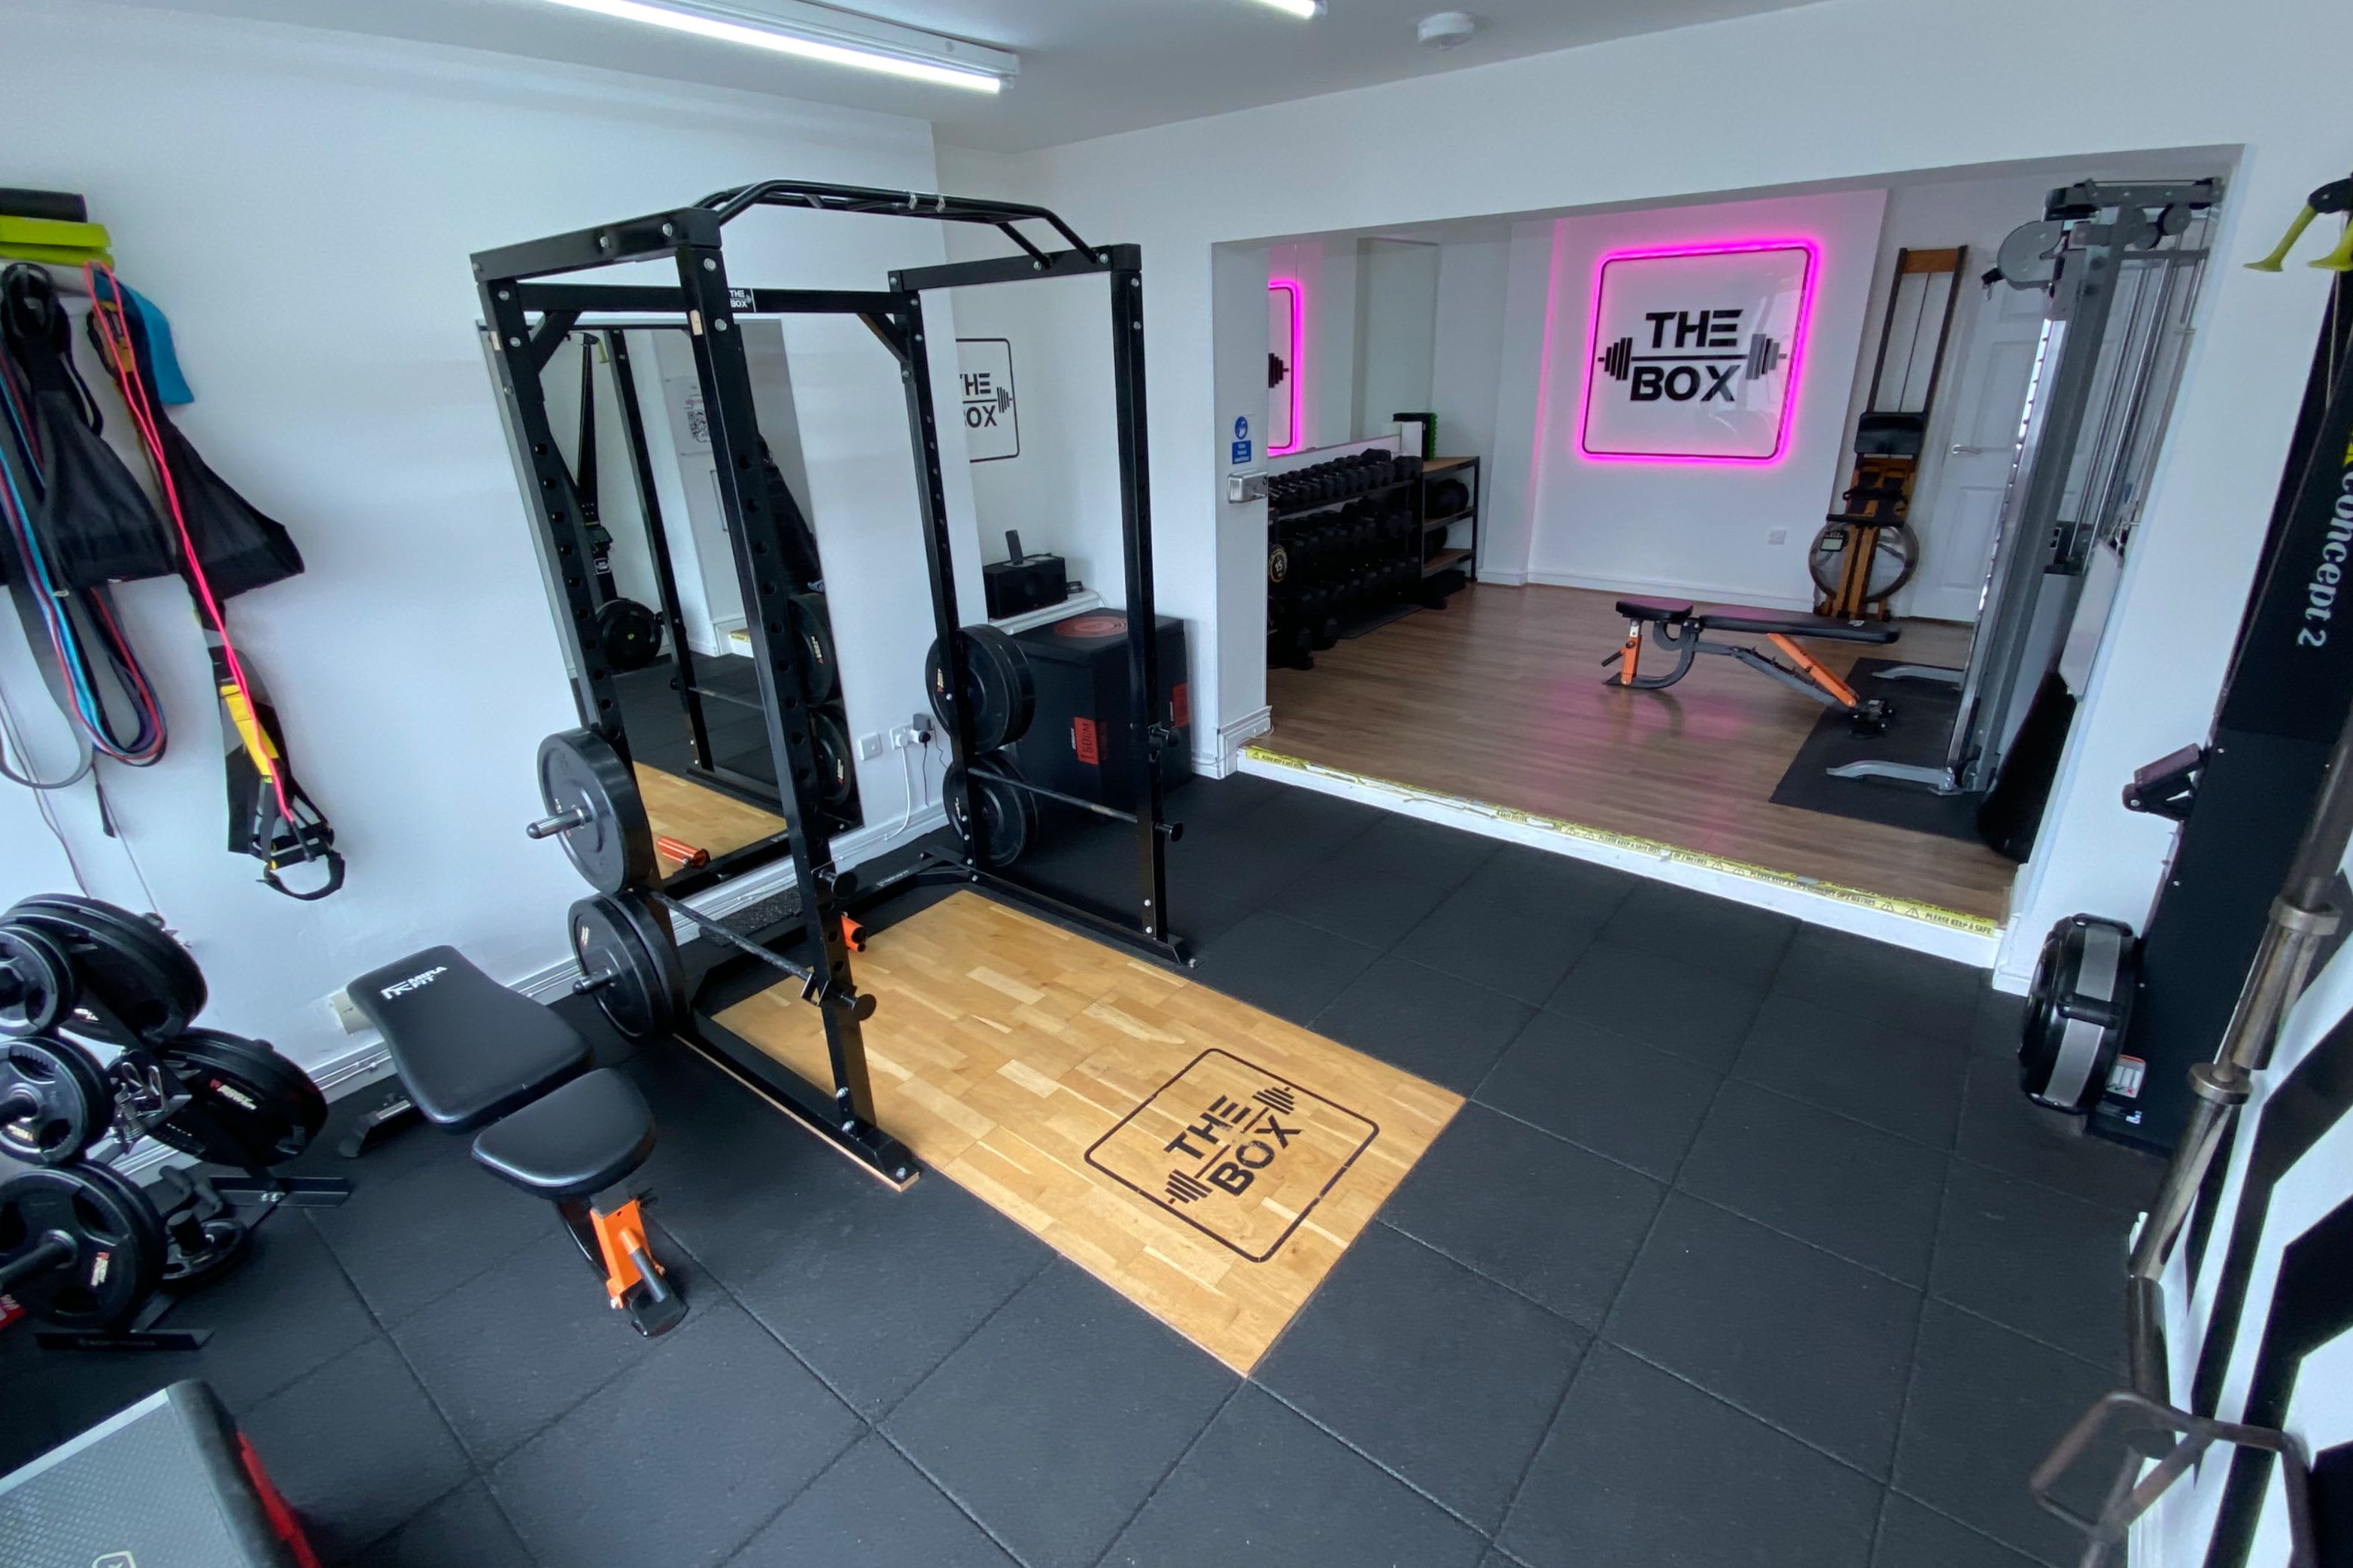 The Box Personal Training Studio - Gym Time: Read Reviews and Book Classes  on ClassPass